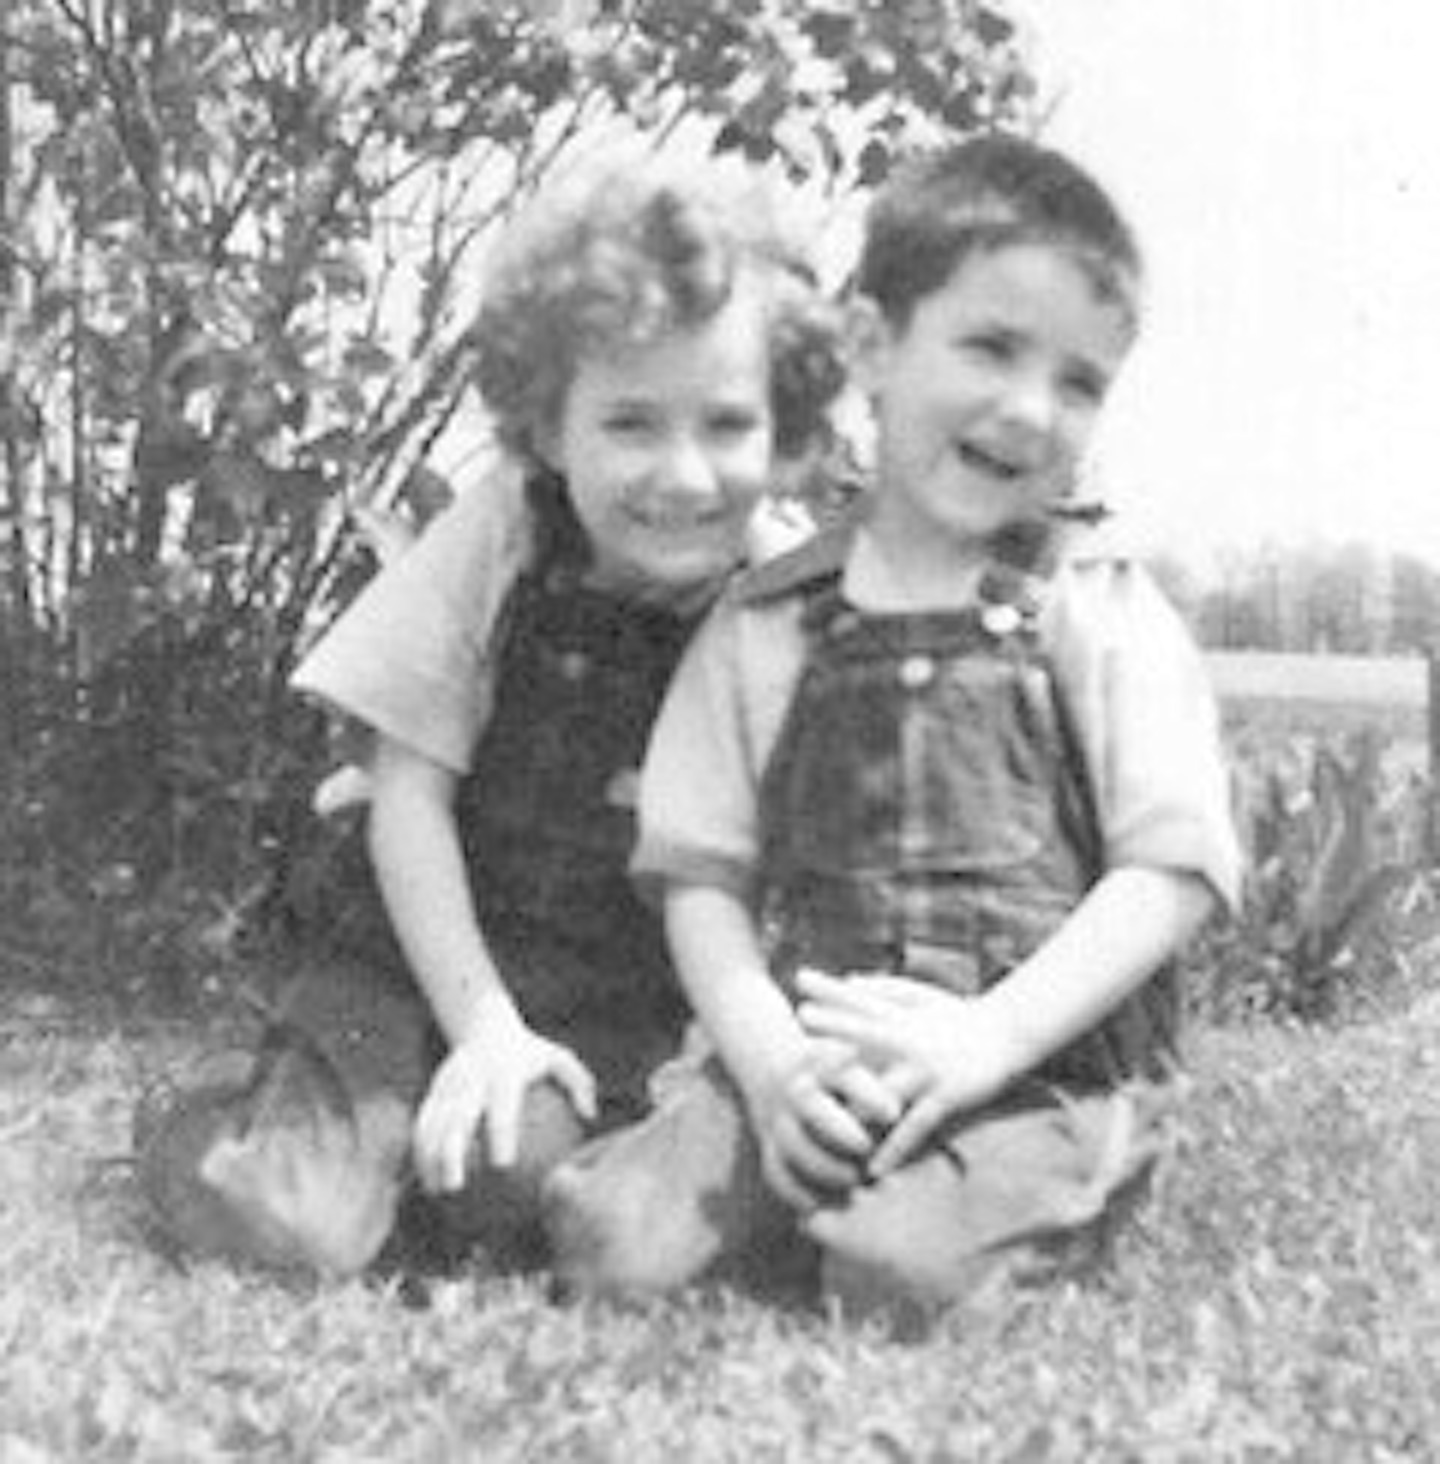 Ron (age 3) and his sister in Logansport, Indiana, 1951. 